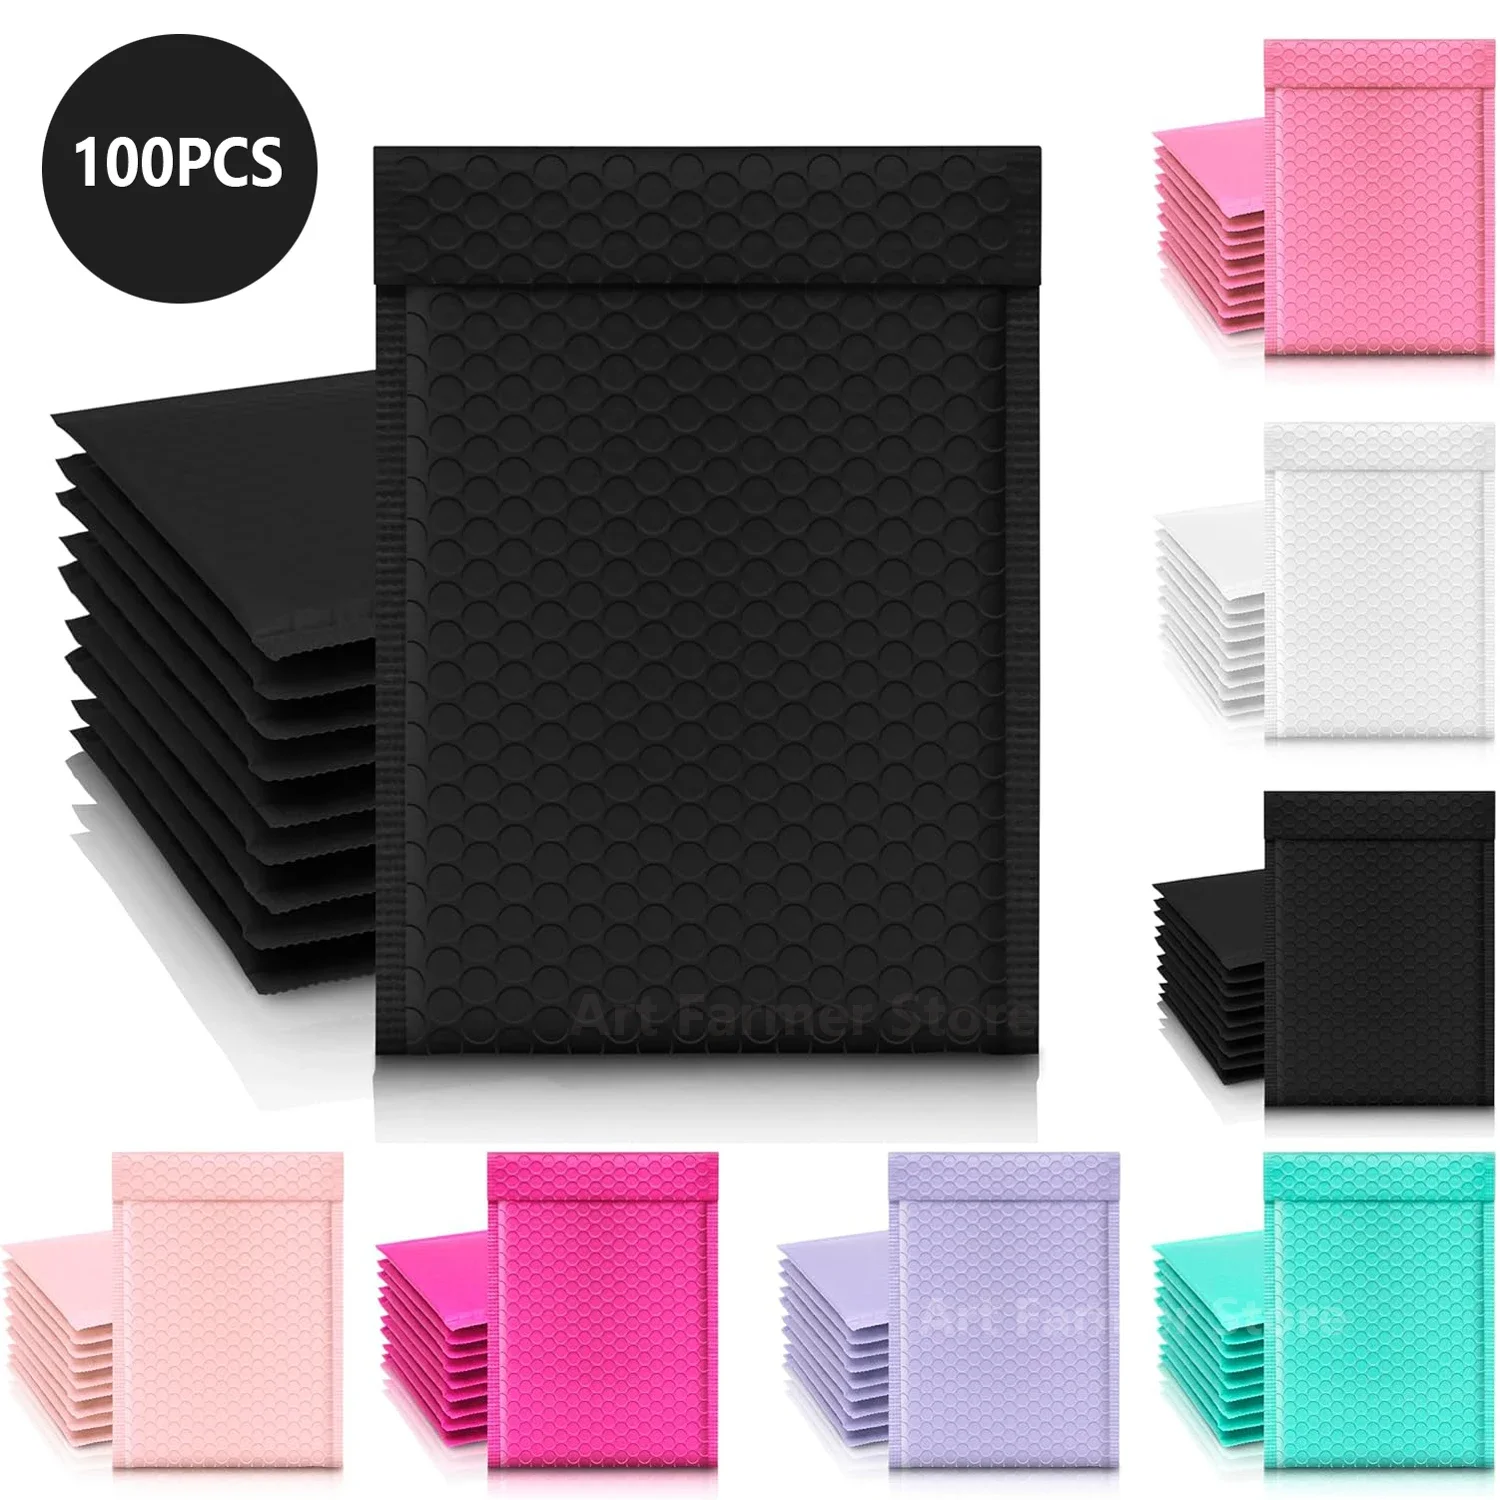 100Pcs Bubble Mailer Black Envelopes Shipping Packages Packaging Supplies Packing Bag Envelope Sending Package Small Business